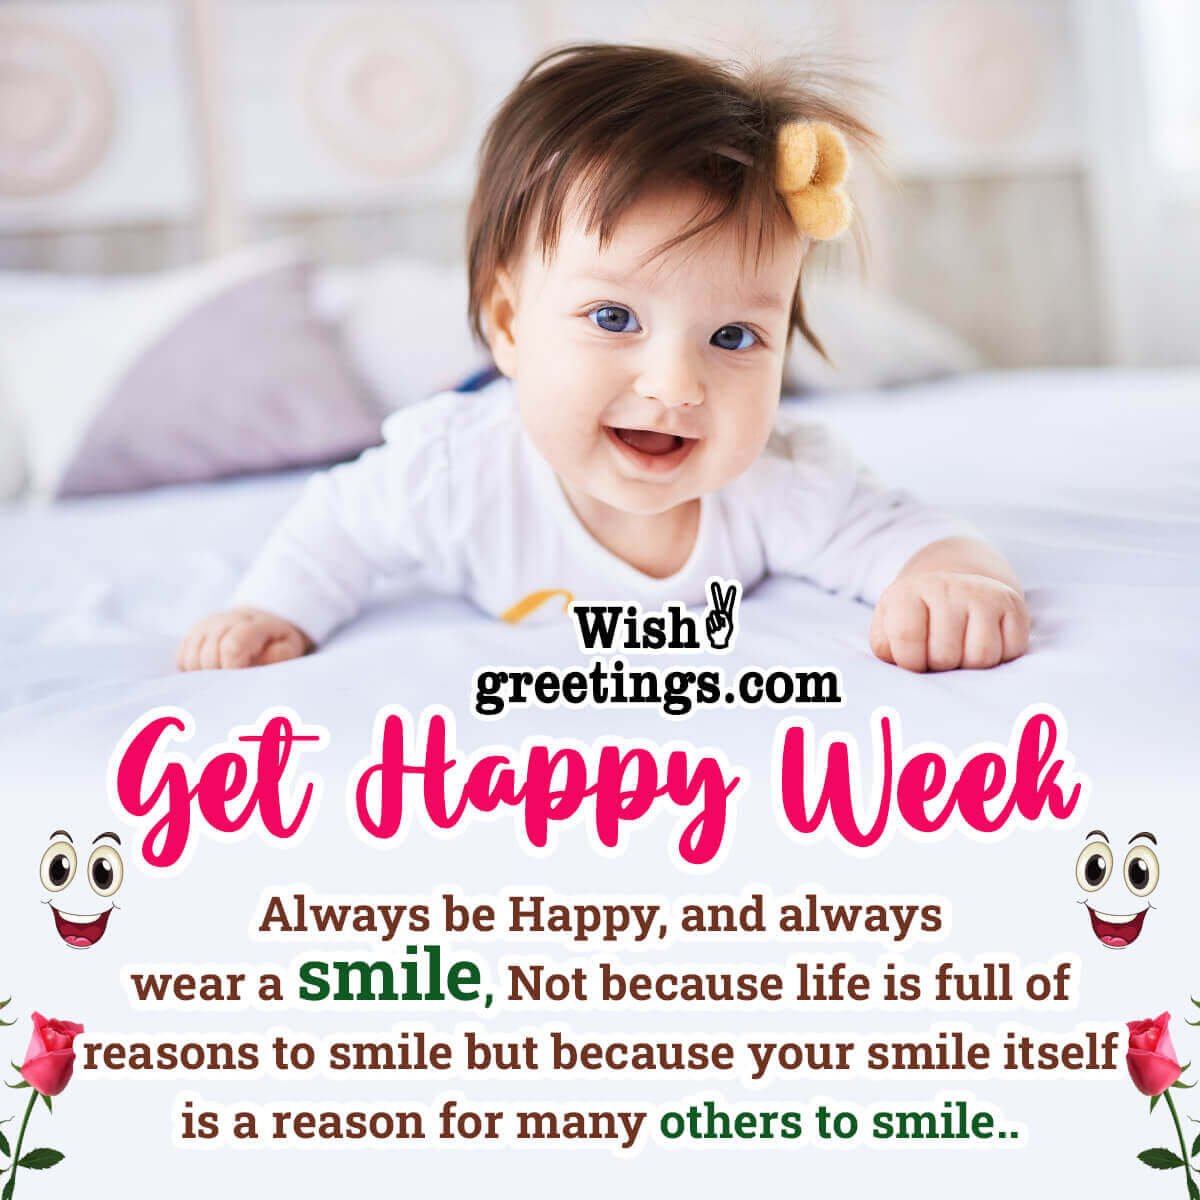 Get Happy Week Wishes Messages